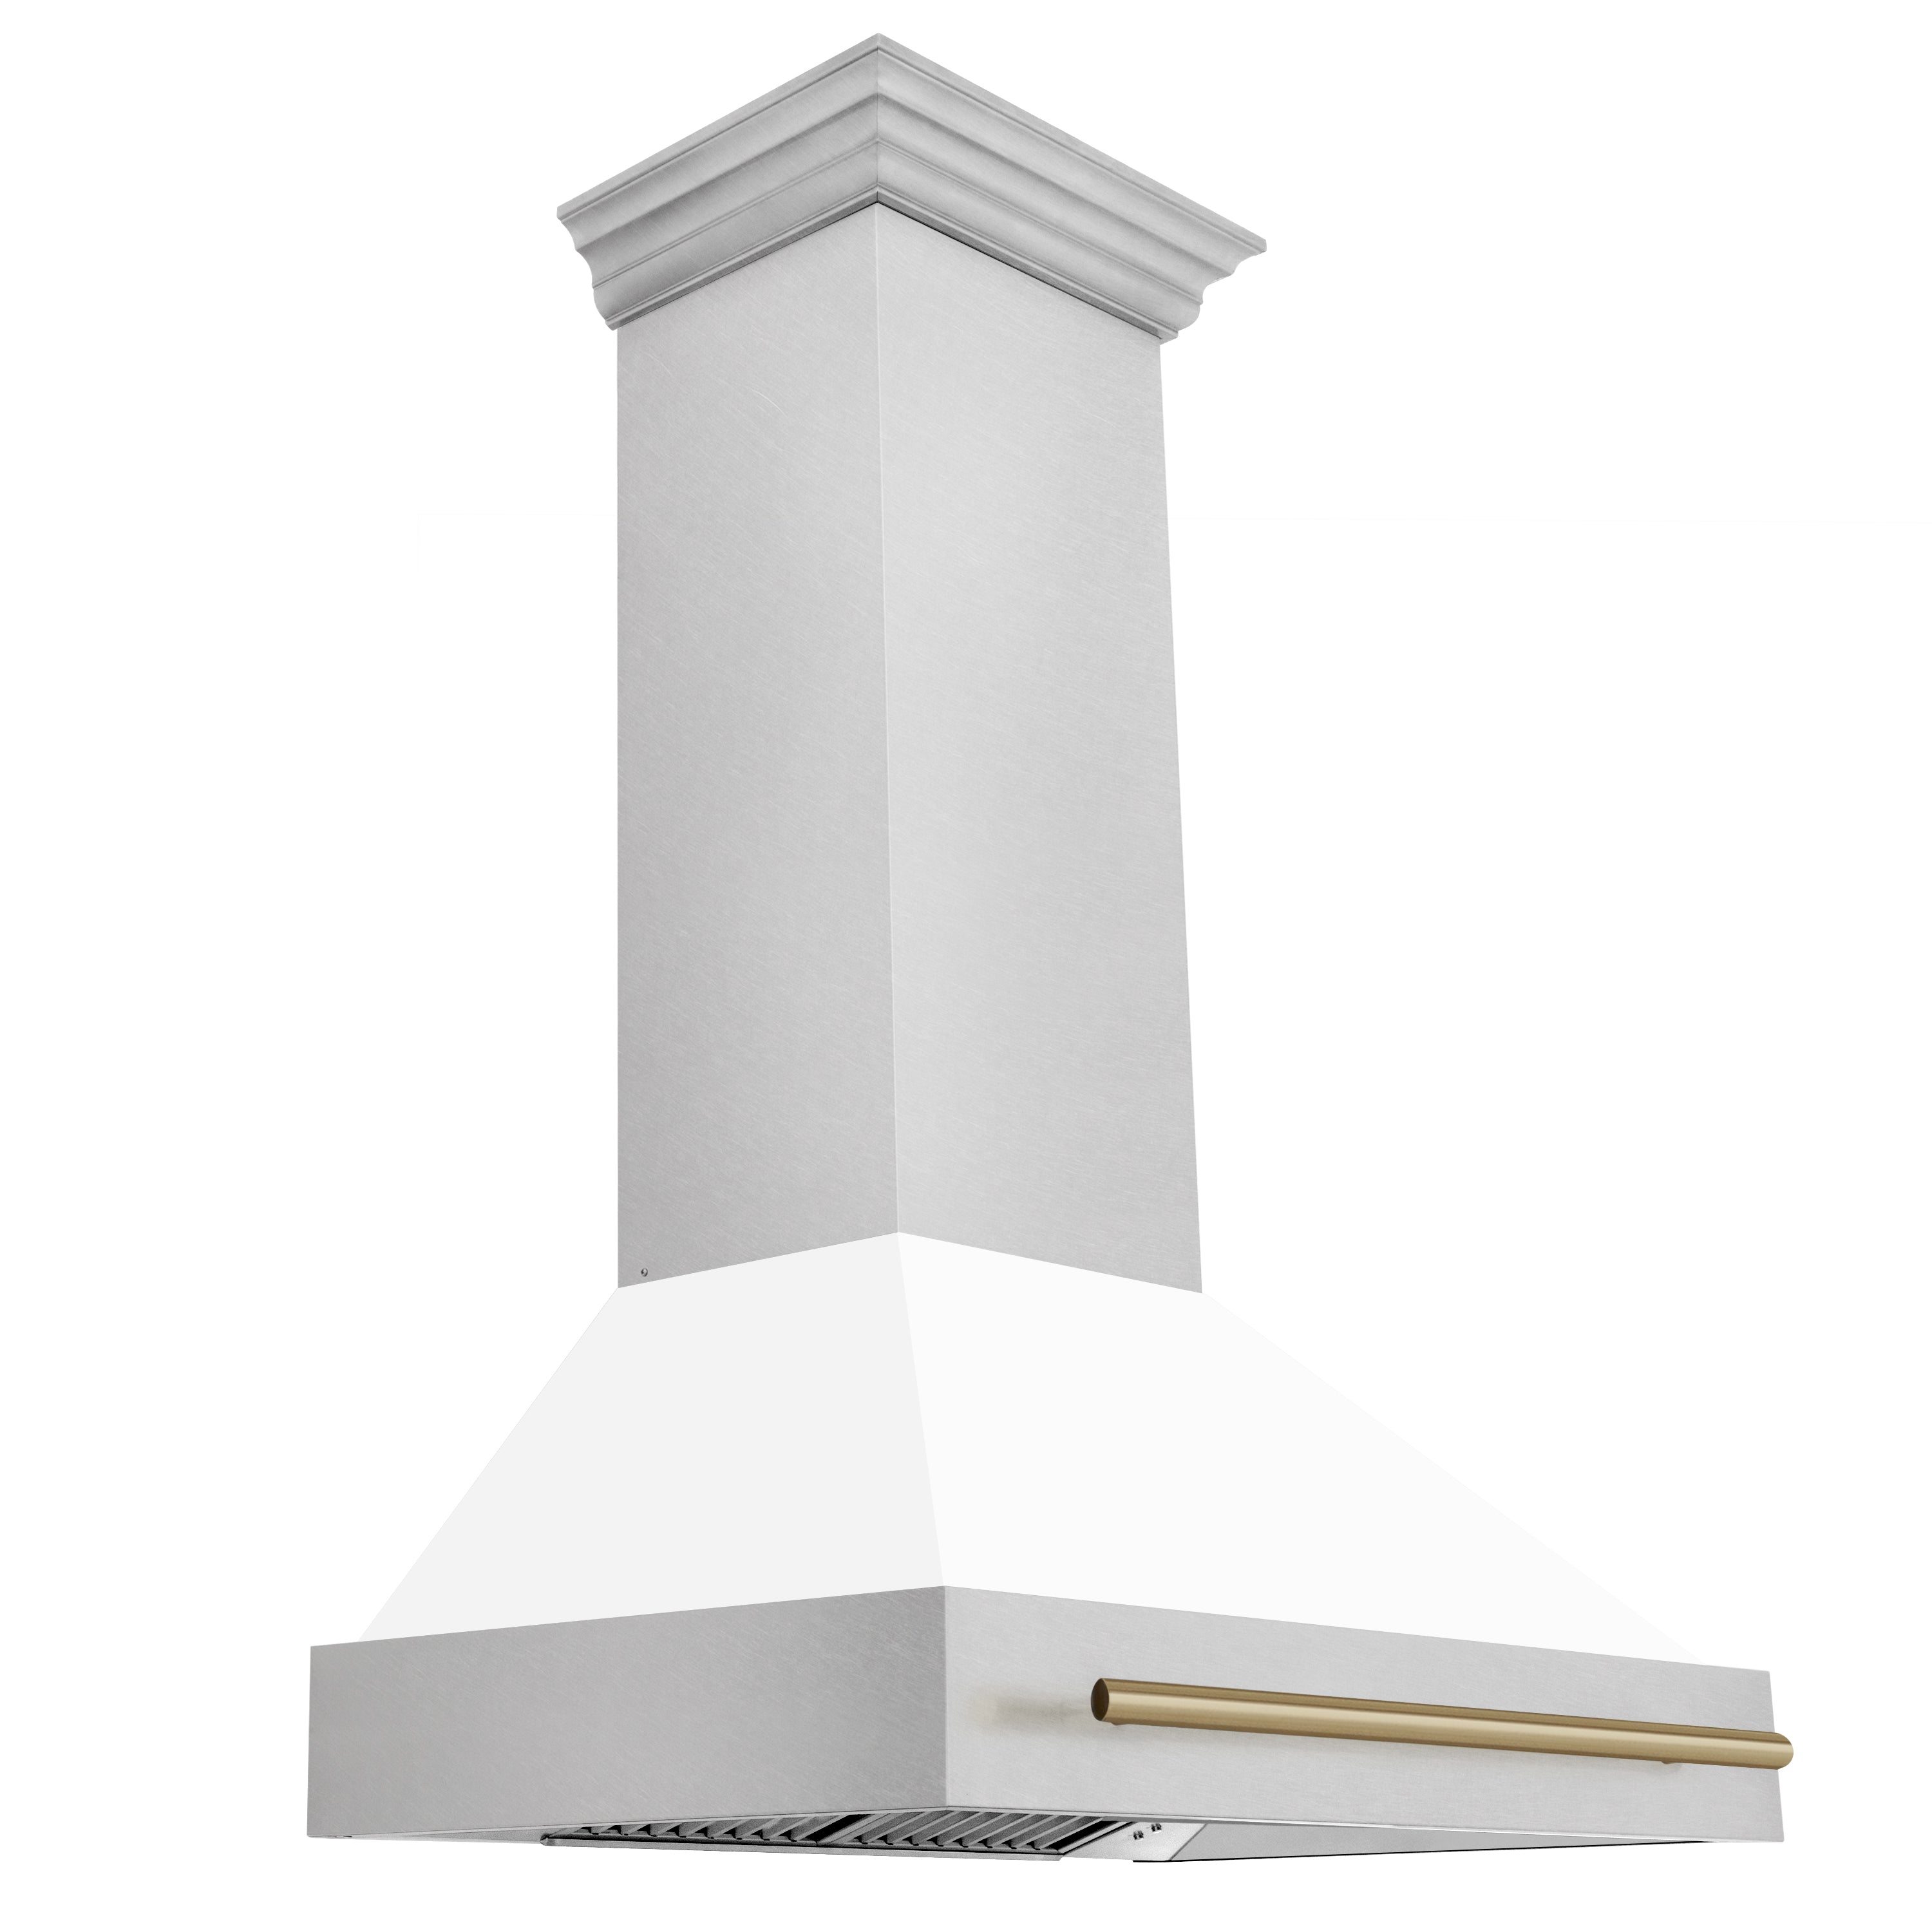 ZLINE 36" Autograph Edition Fingerprint Resistant Stainless Steel Range Hood with White Matte Shell and Champagne Bronze Handle (8654SNZ-WM36-CB)